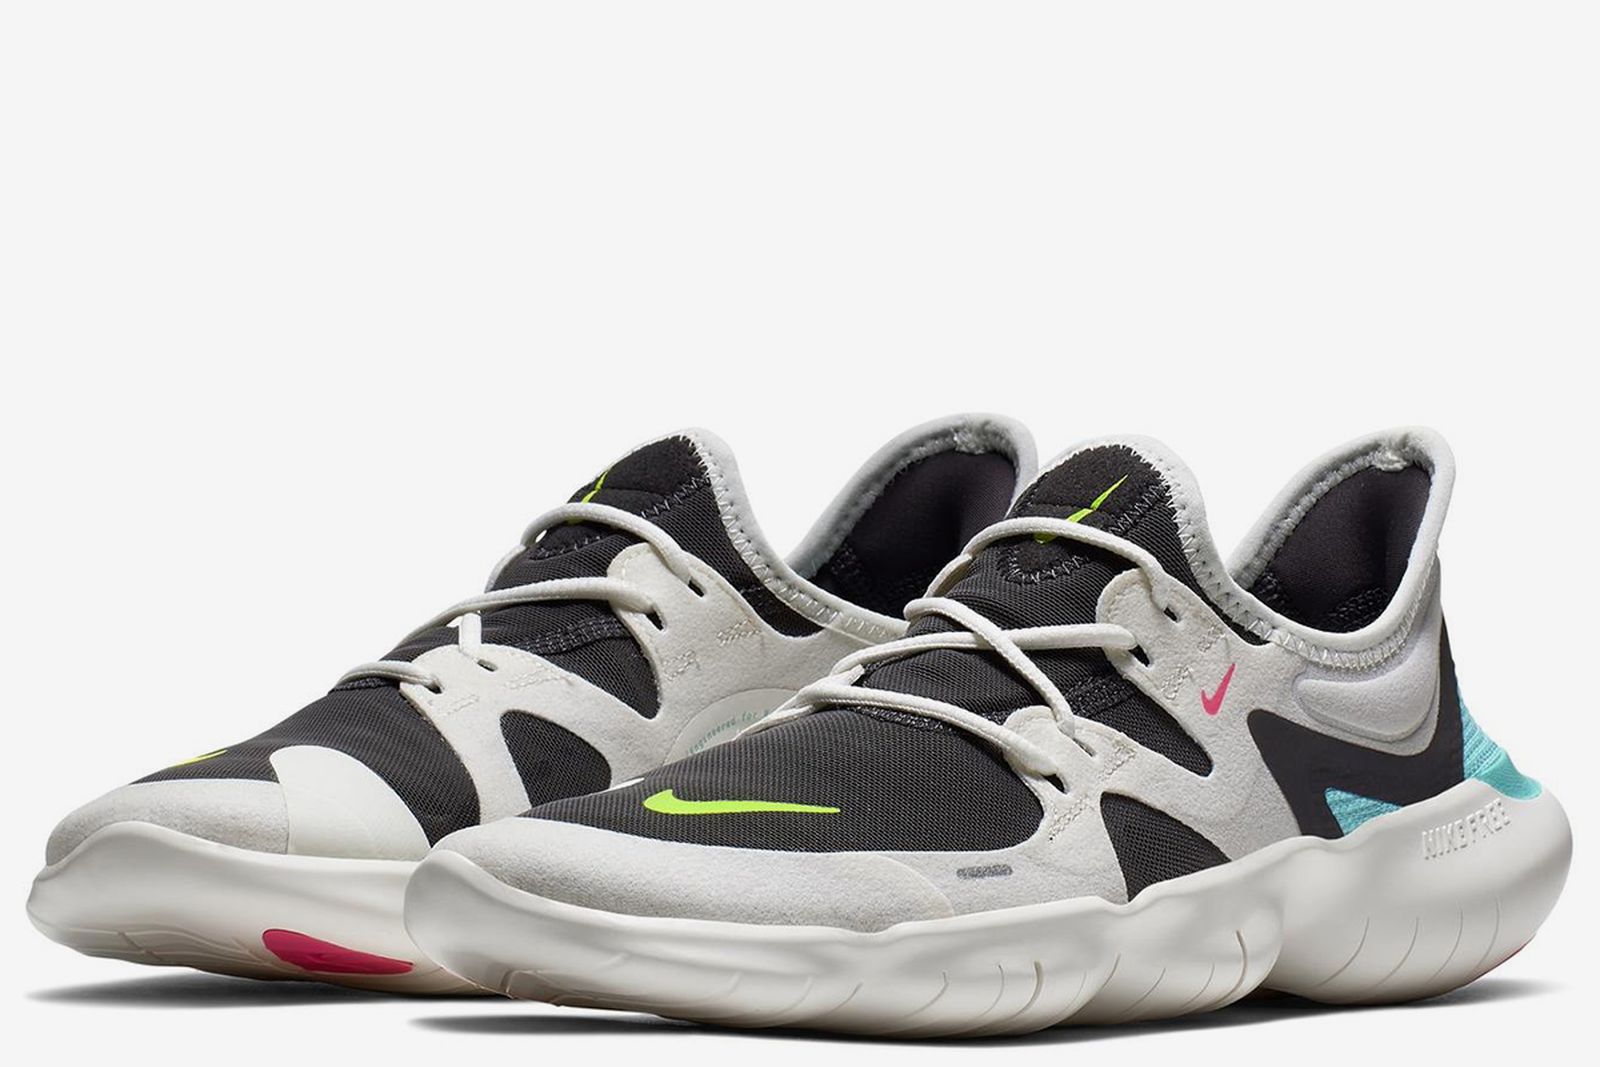 Nike Introduces the Free RN 5.0 Free RN